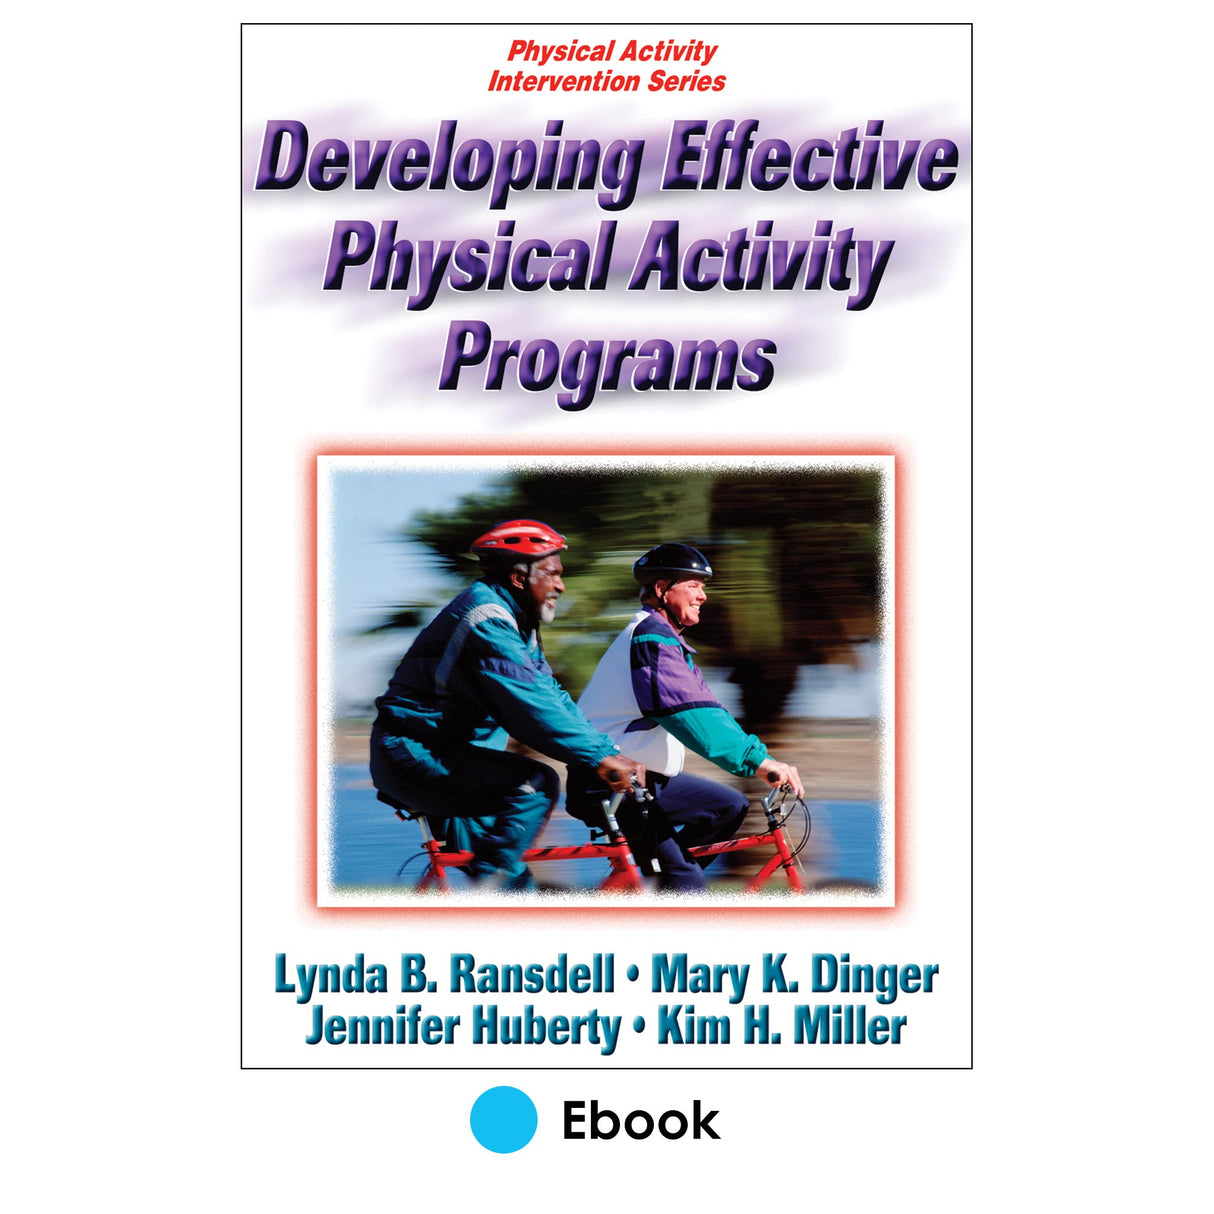 Developing Effective Physical Activity Programs PDF